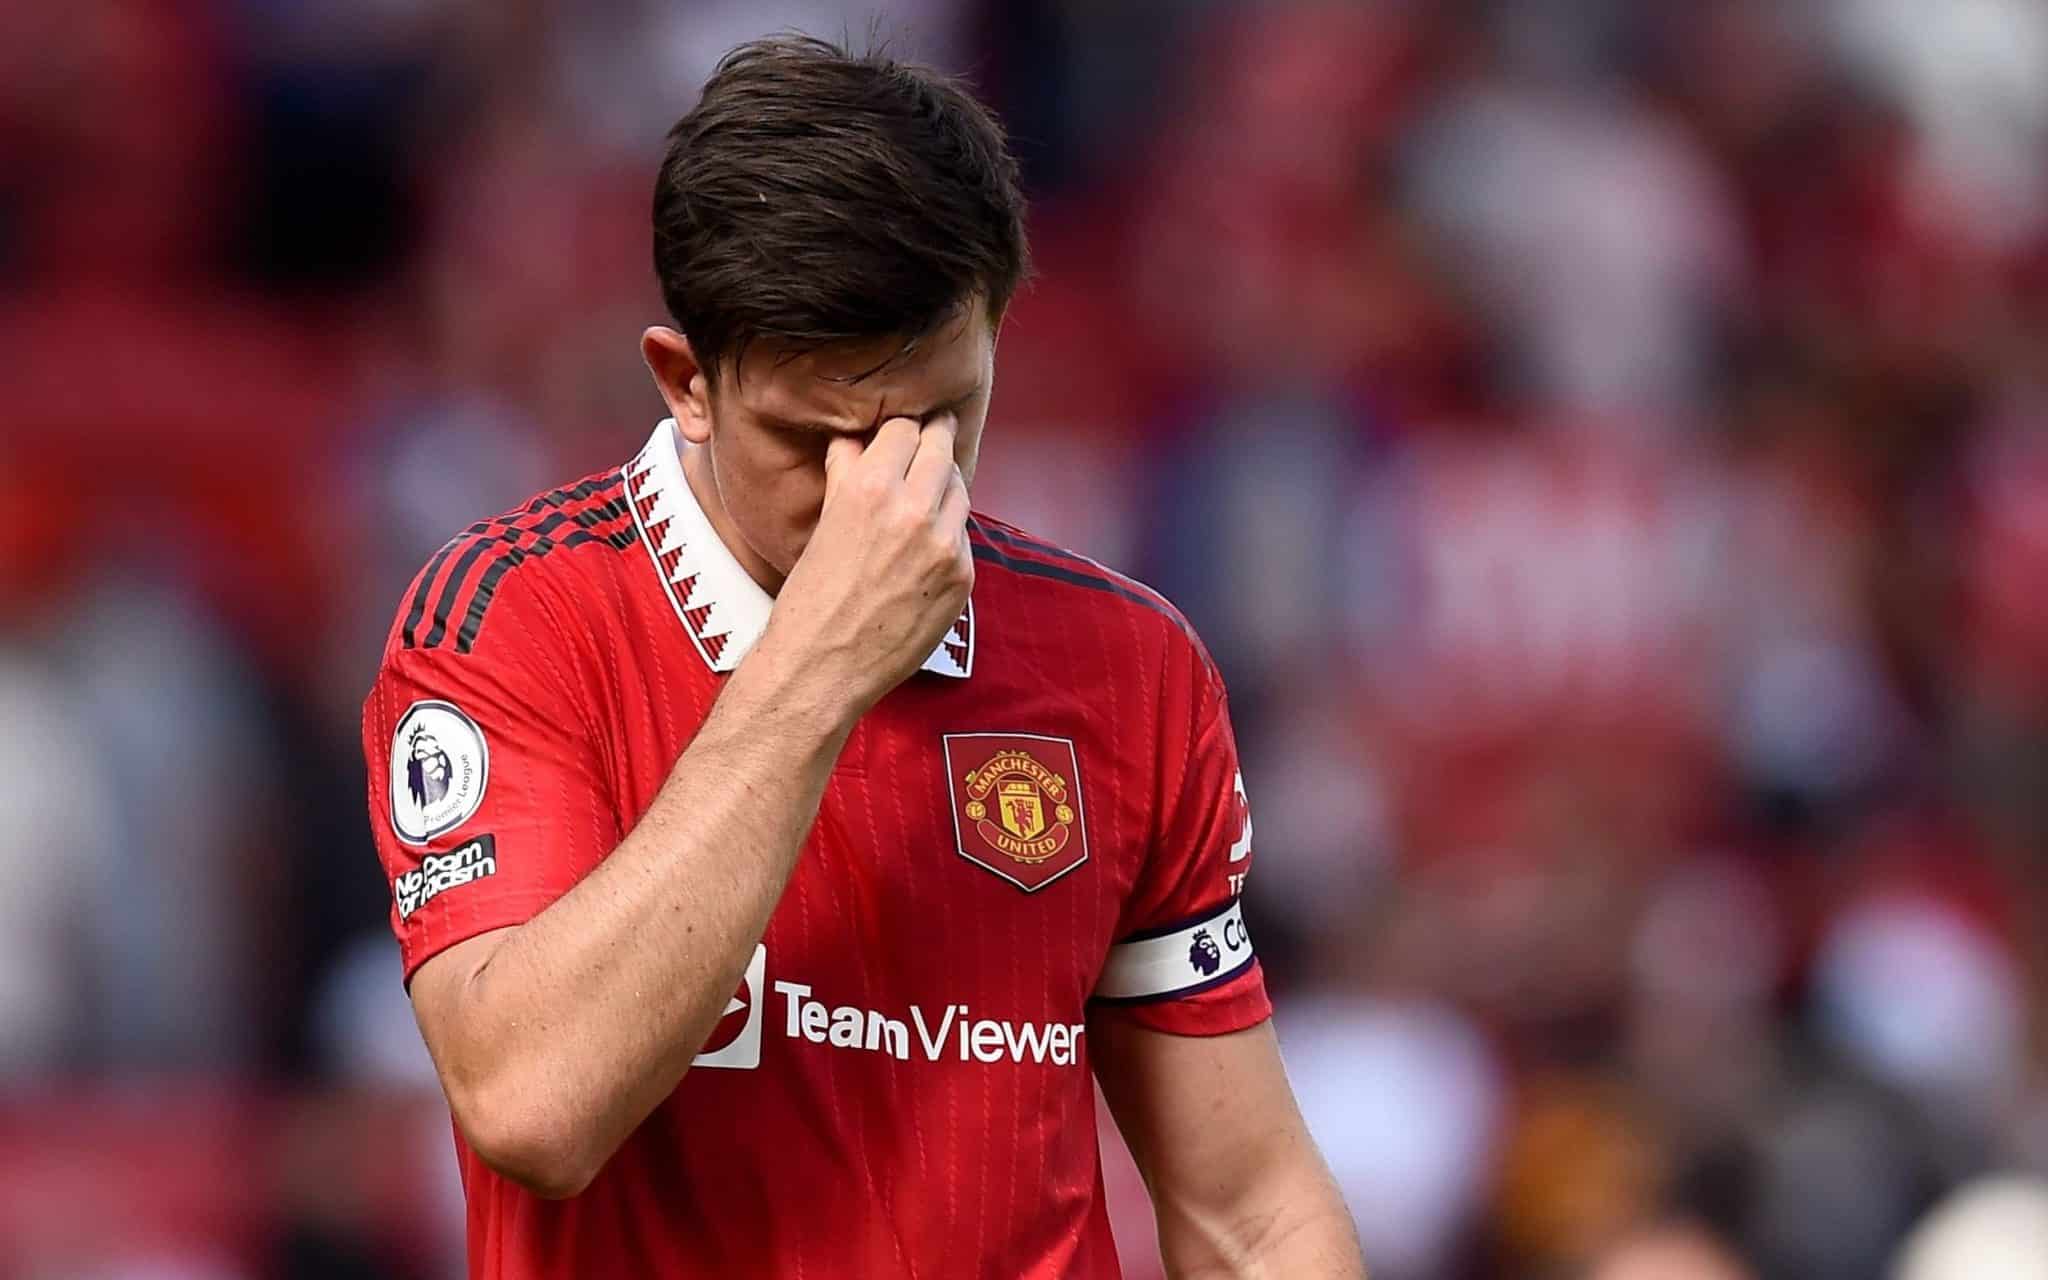 Harry Maguire pelo Manchester United (Foto: Peter Powell/EPA-EFE/Shutterstock)